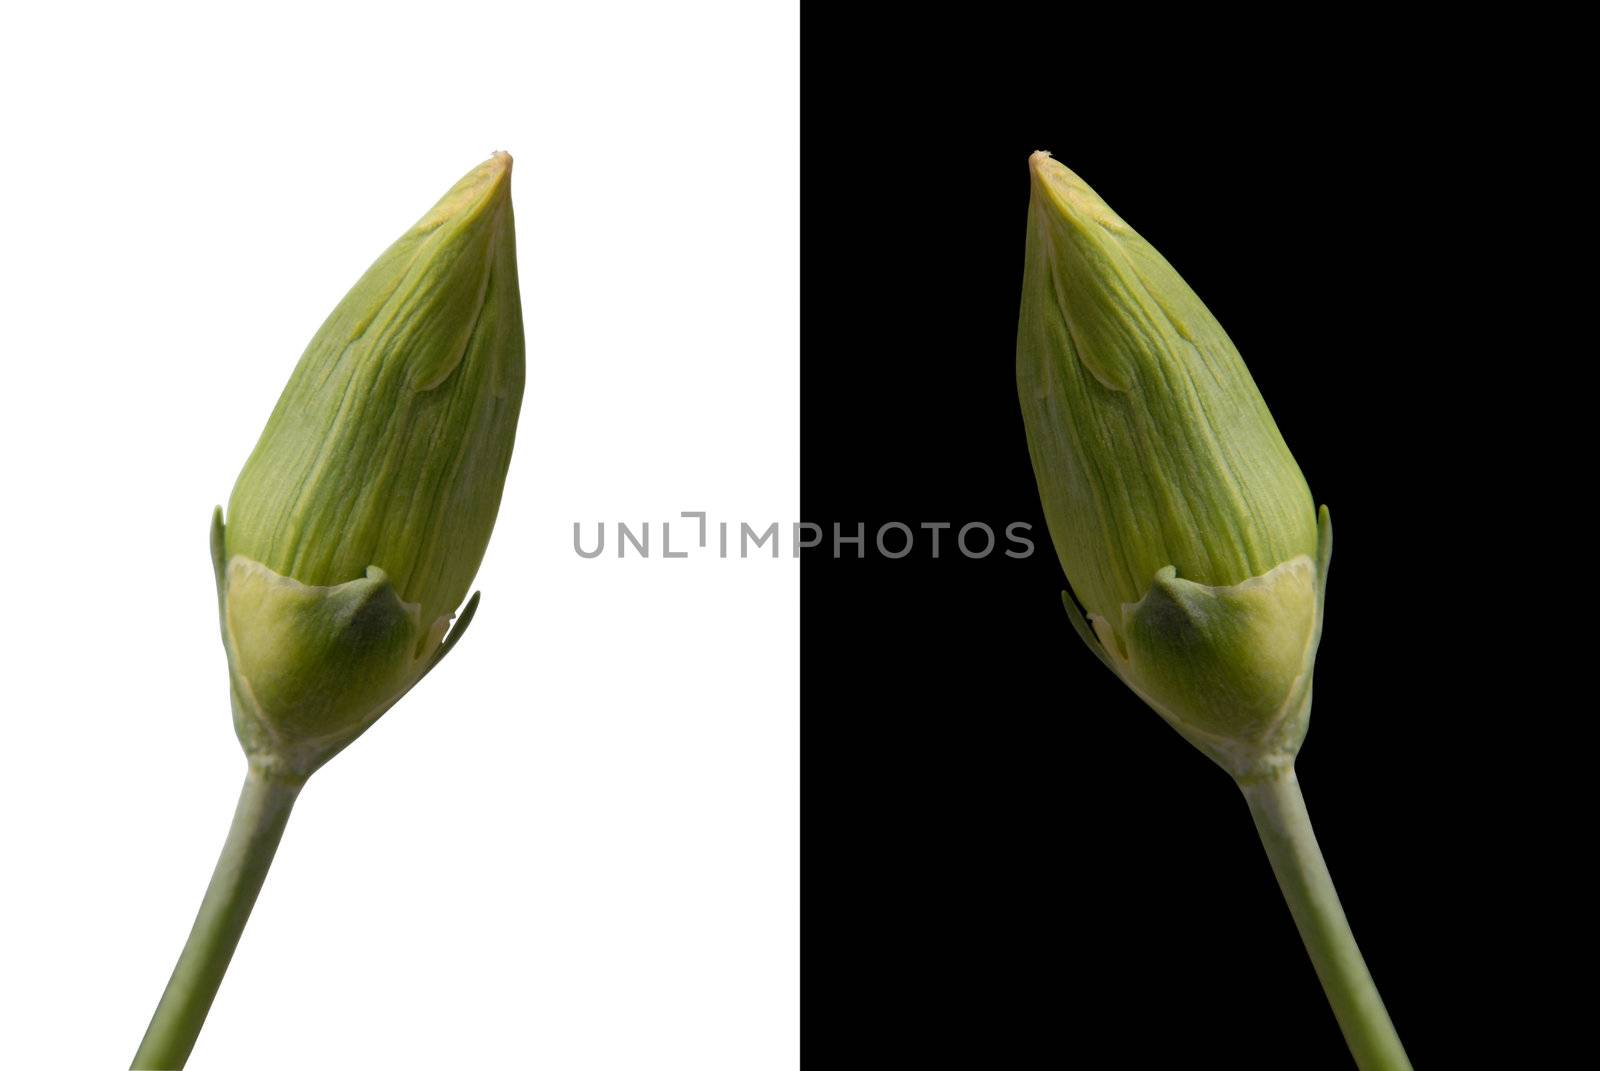 Two carnation bud flowers isolated on both black and white background respectively. Included clipping path, so you can easily cut it out and place over the top of a design.